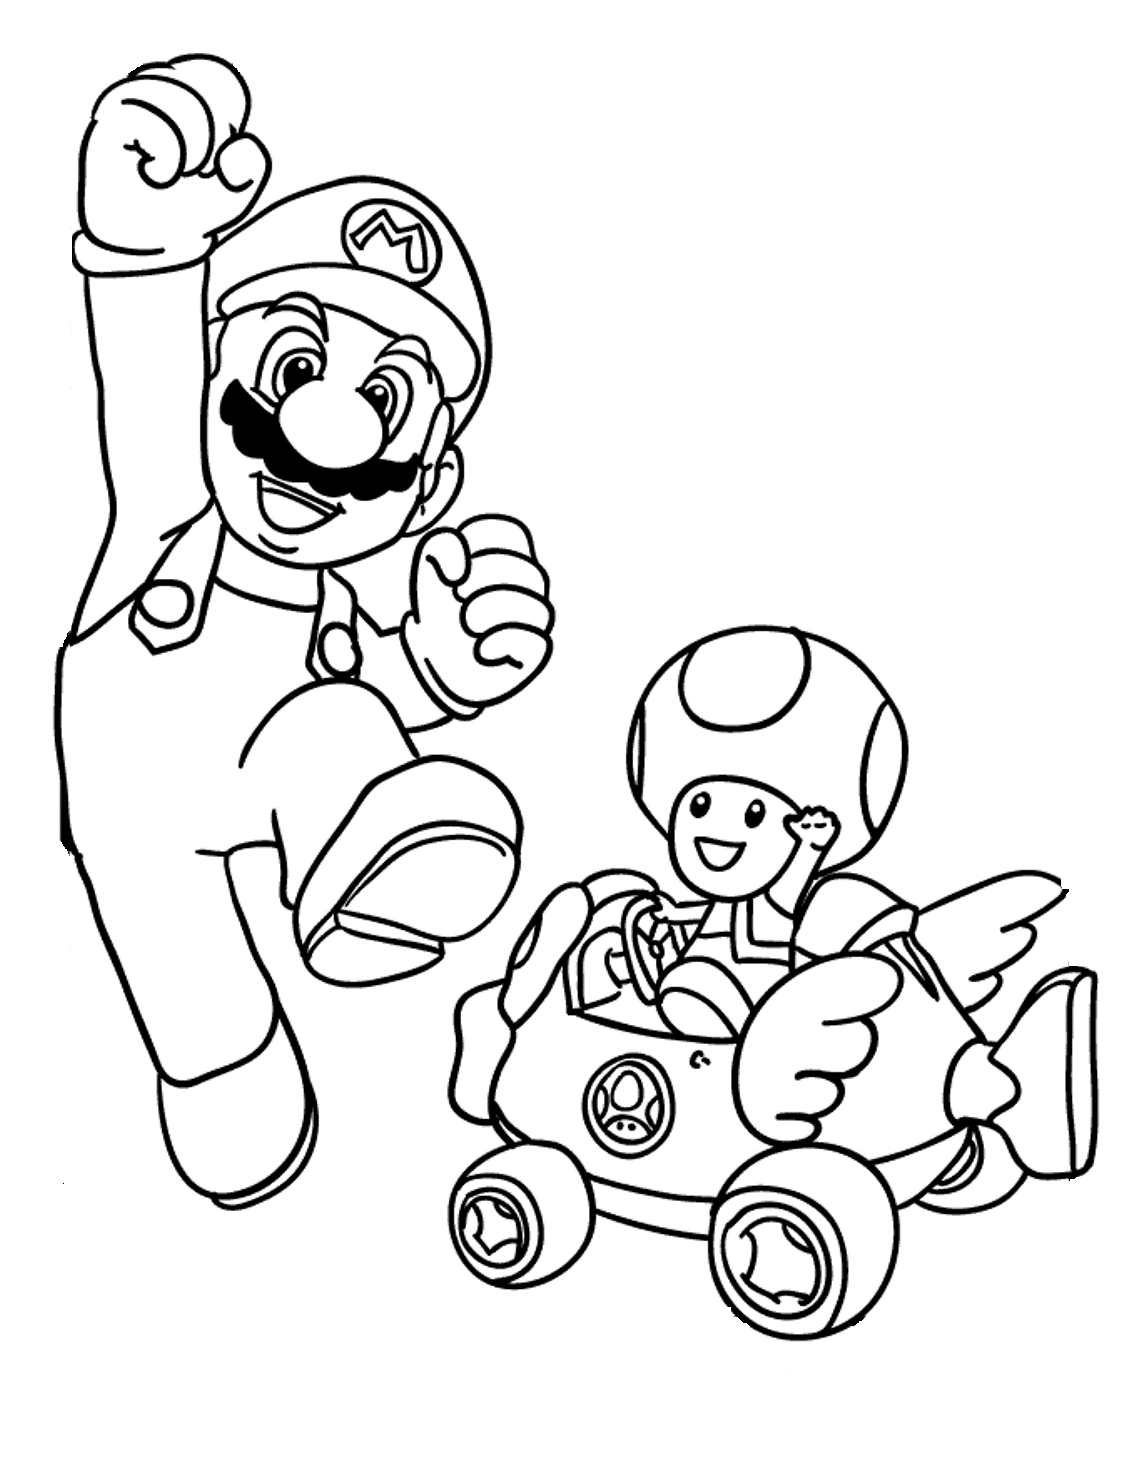 Coloring Pages Mario Brothers Characters - Coloring Home